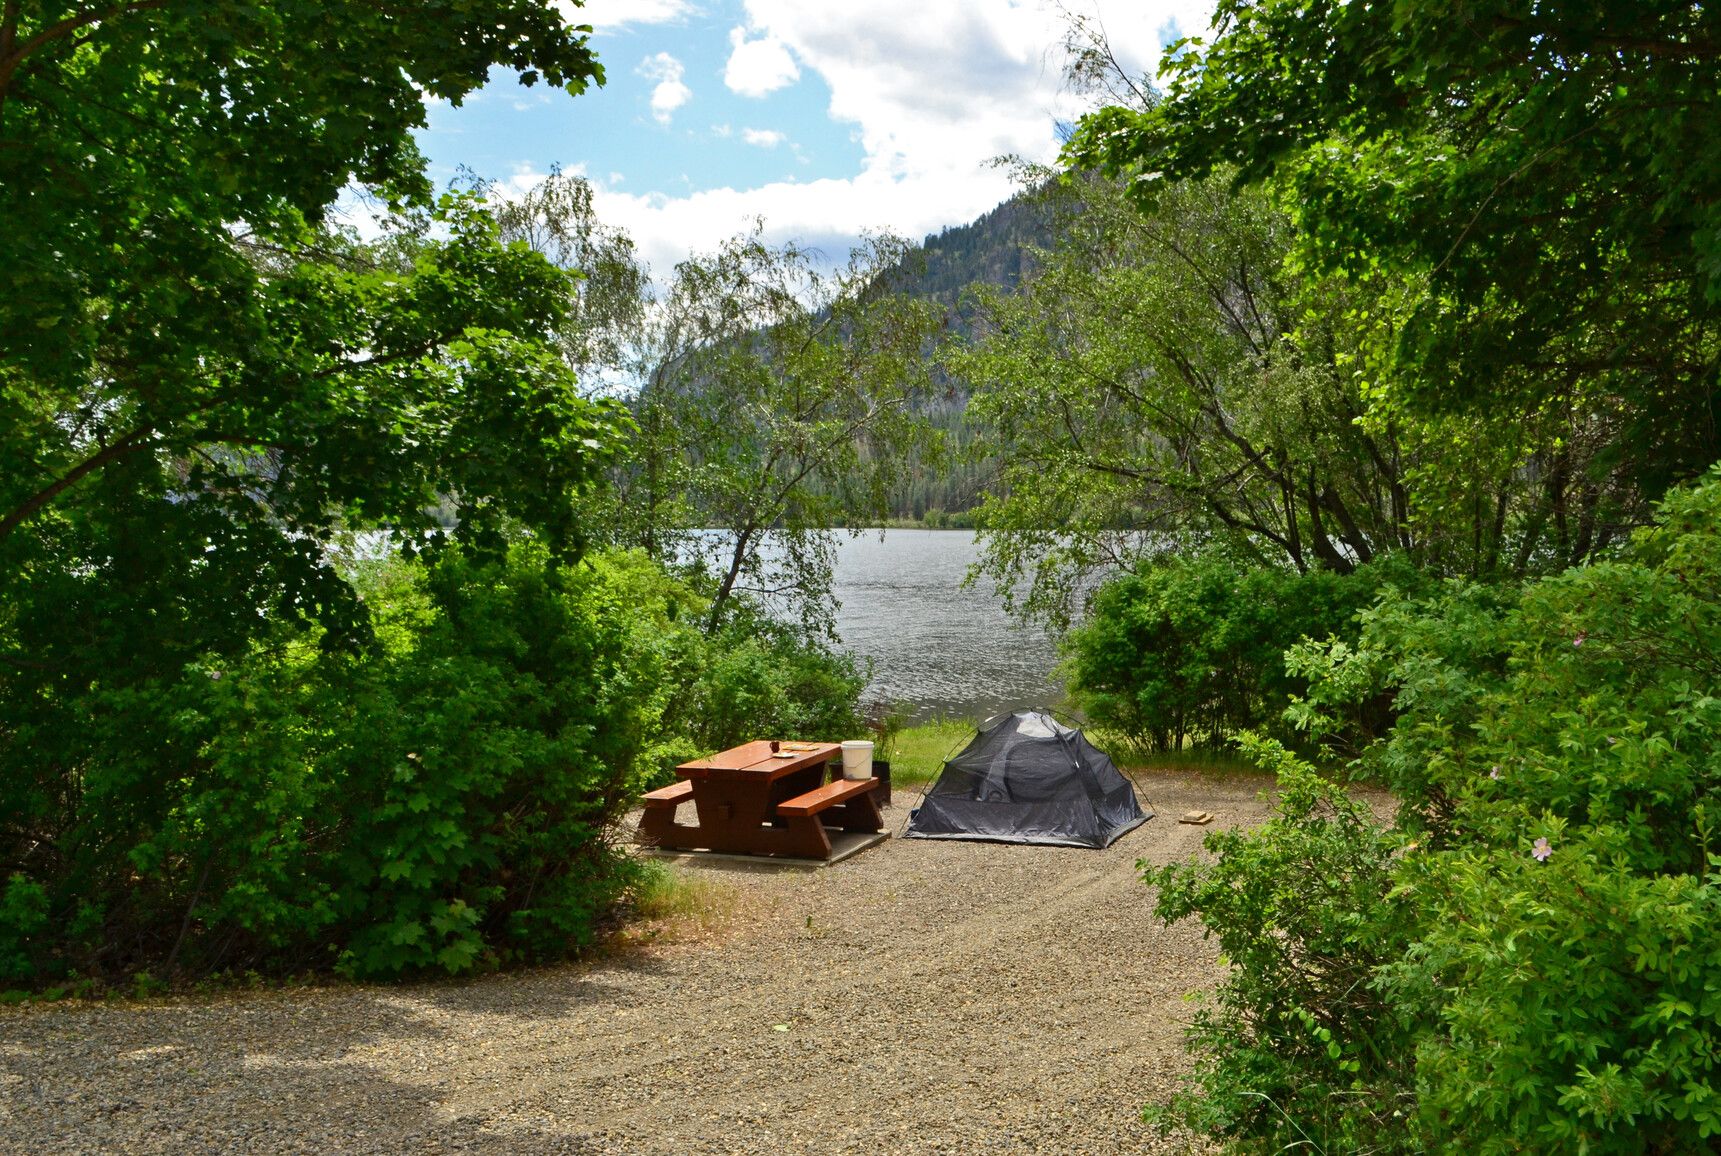 Vaseux Lake Park offers lakeside campsites surrounded by forest, providing great views and privacy.